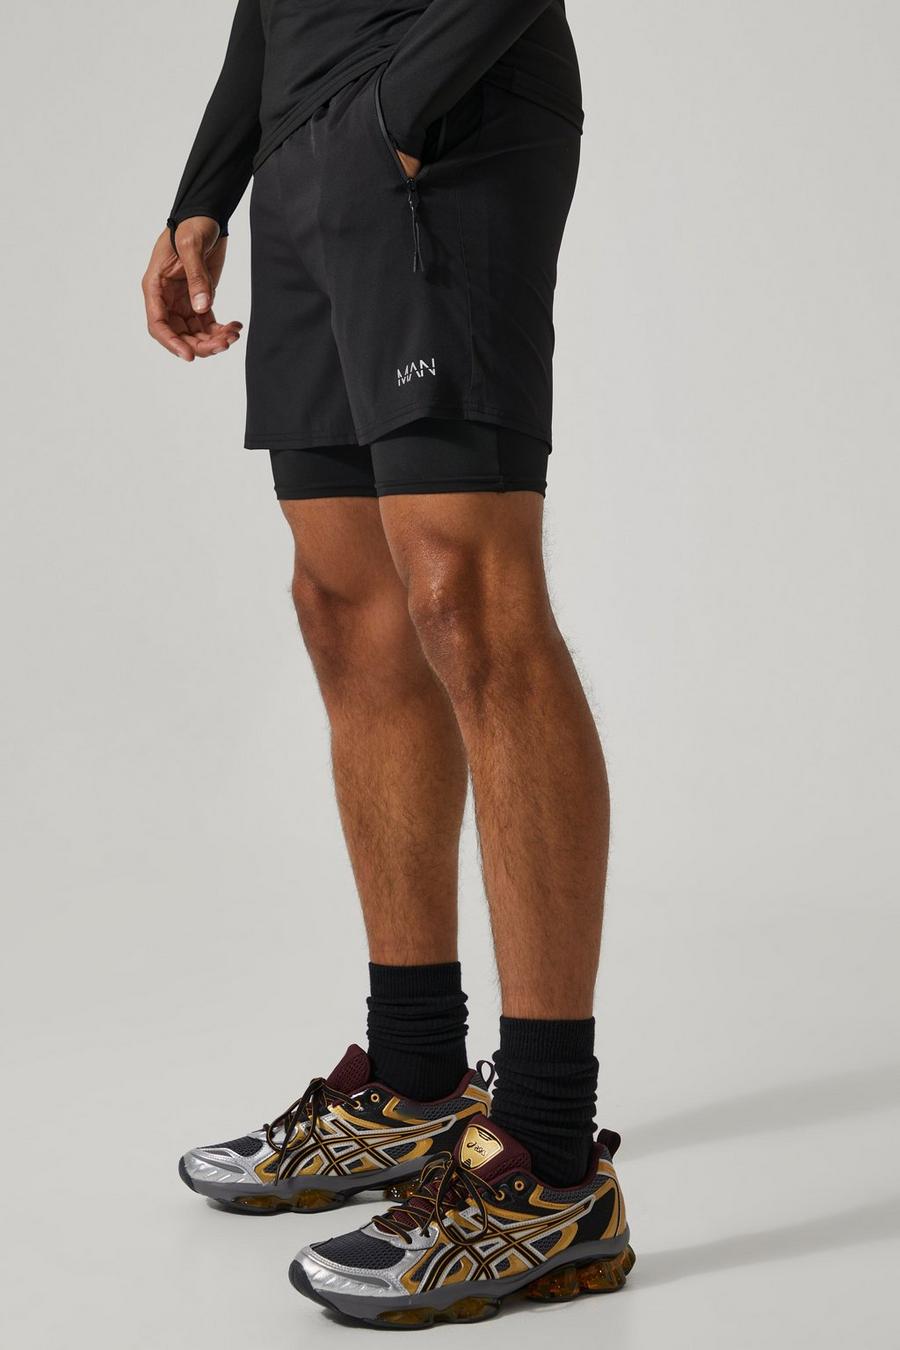 Man Active 2-in-1 Shorts, Black